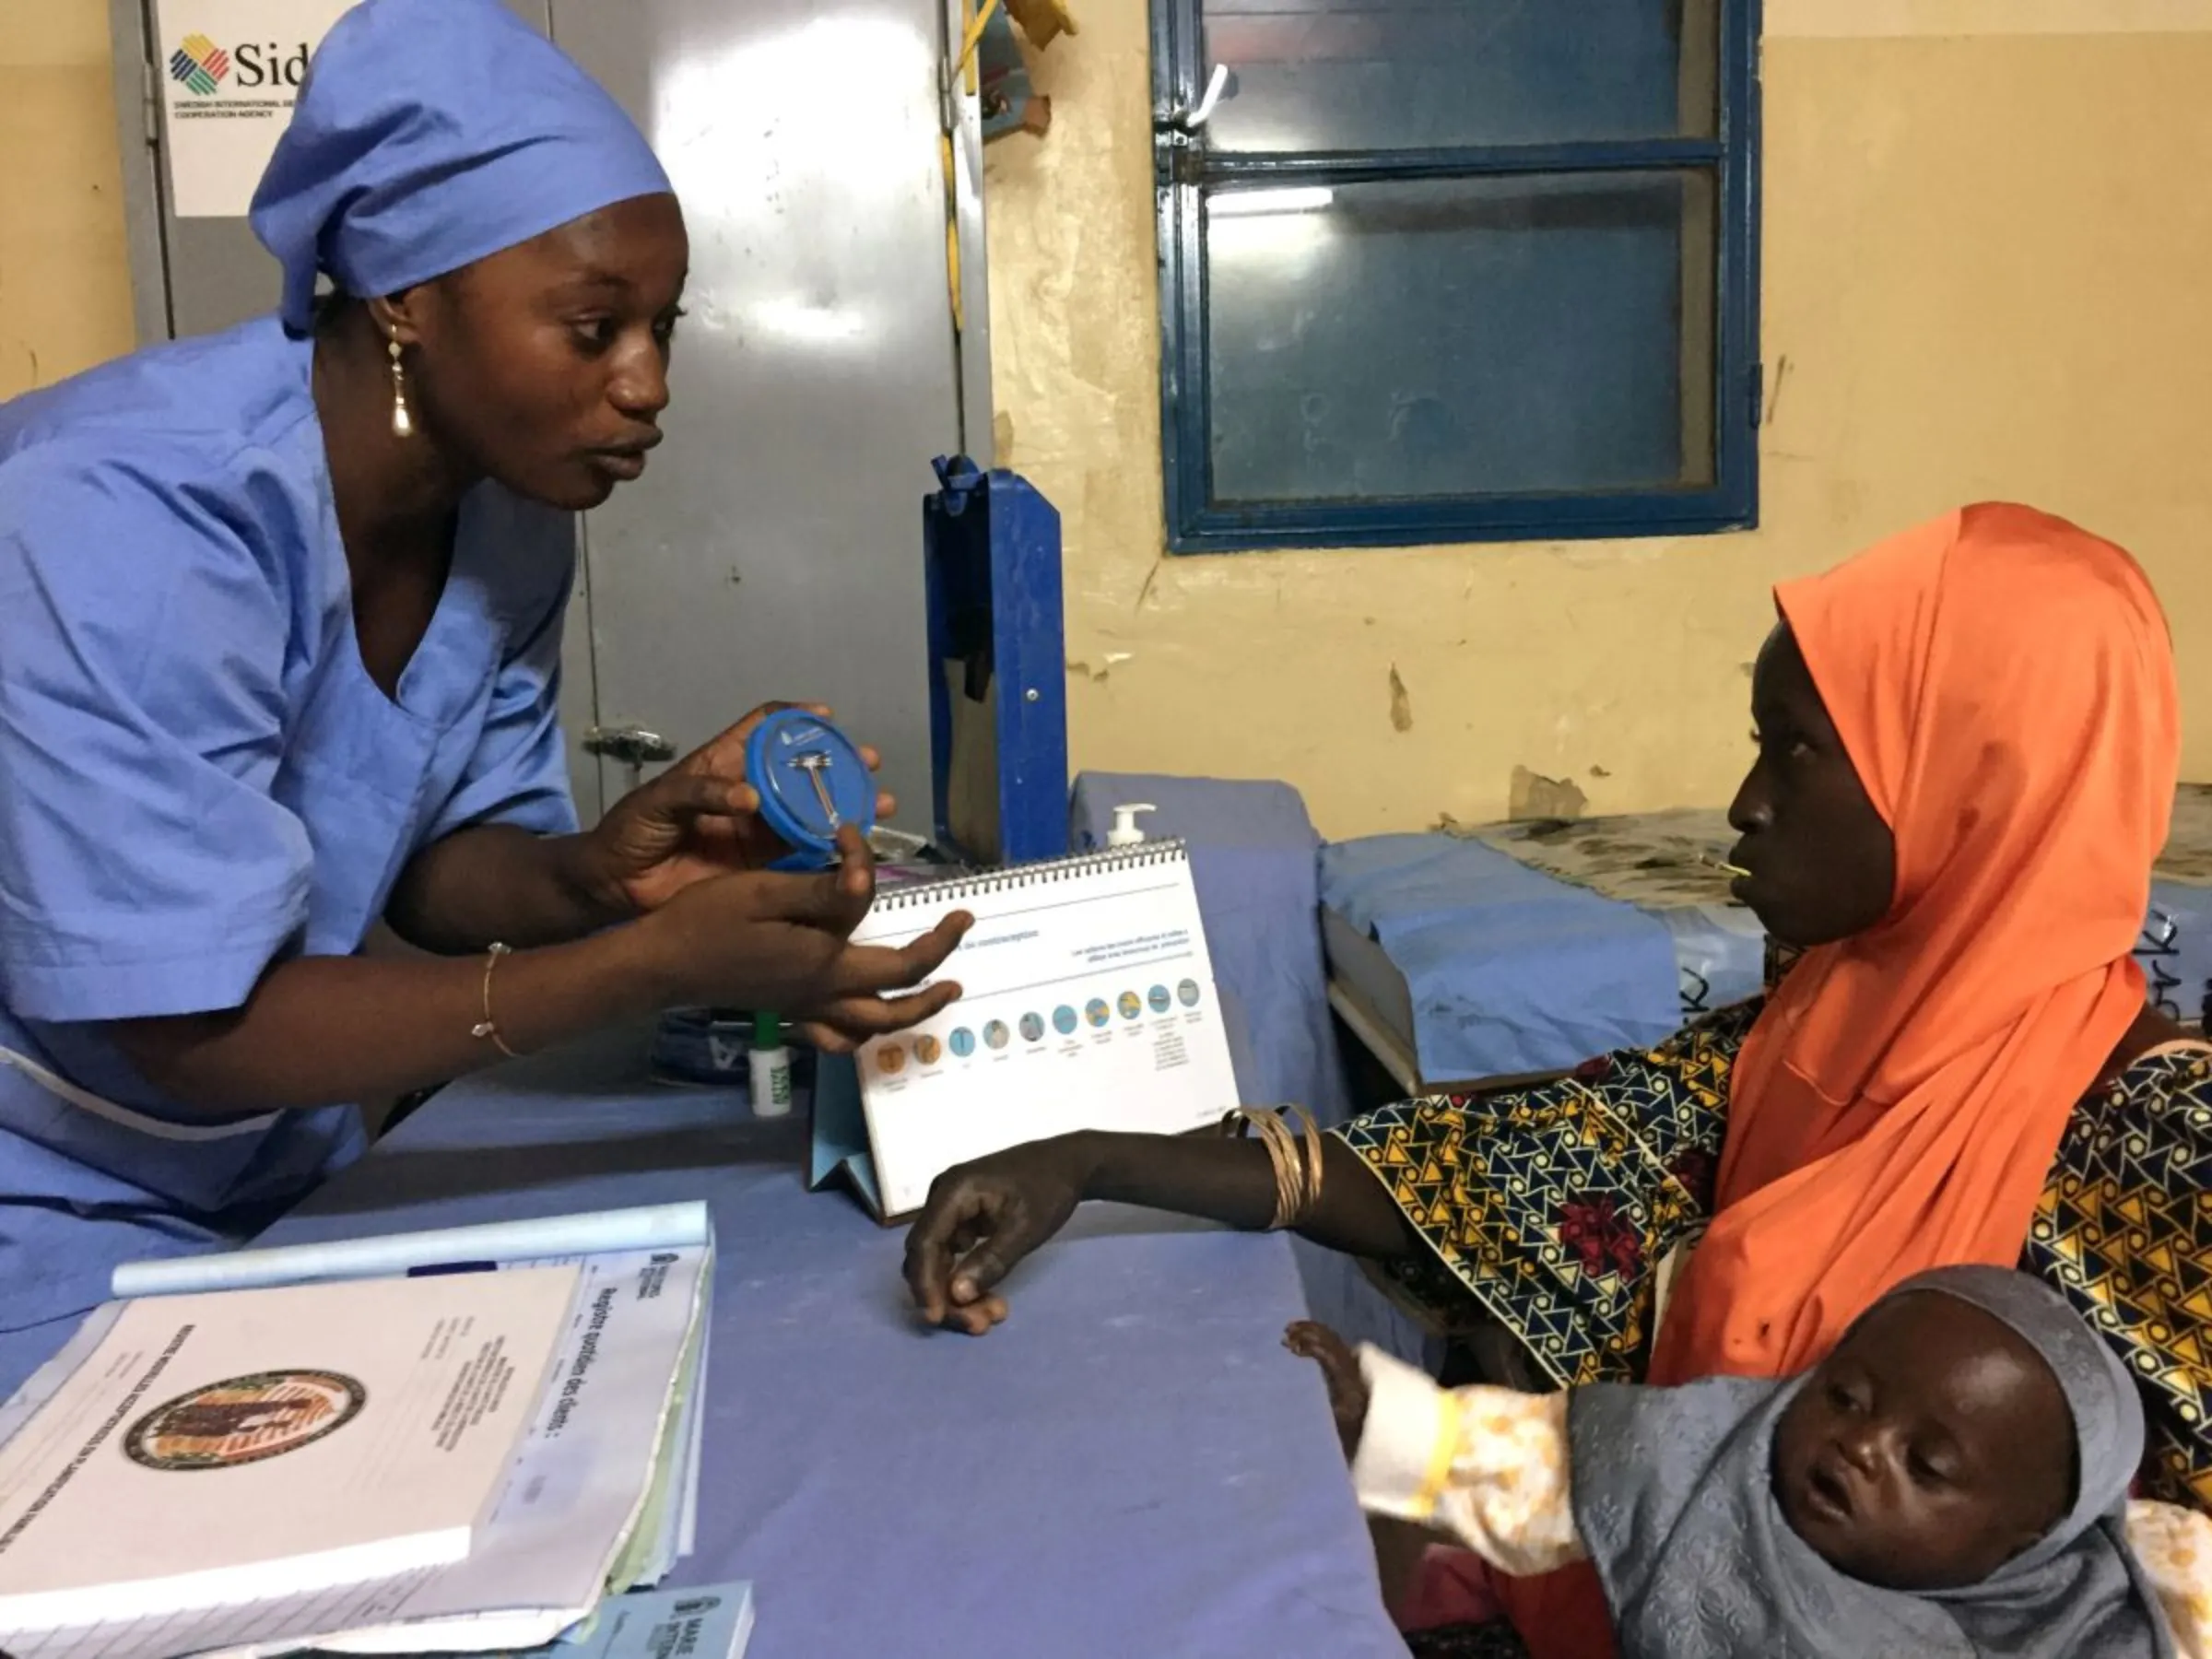 A nurse from MSI Niger explains how a contraceptive implant works to a woman in the village of Libore, southeast of Niger’s capital Niamey, November 2, 2017. REUTERS/Tim Cocks